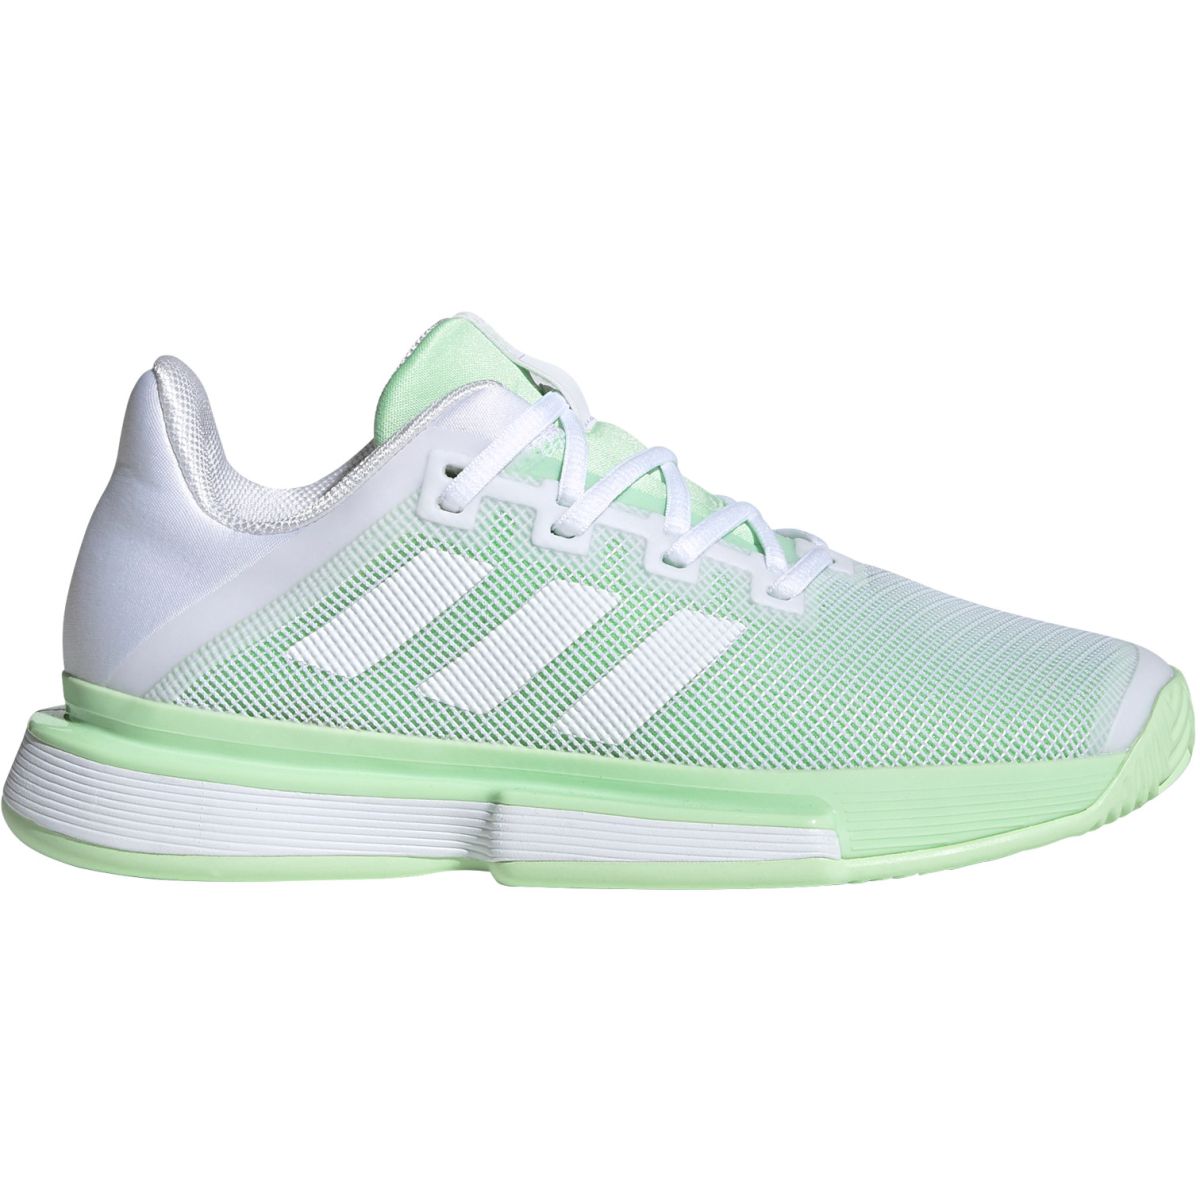 adidas SoleMatch Bounce Women's Tennis Shoes G26790